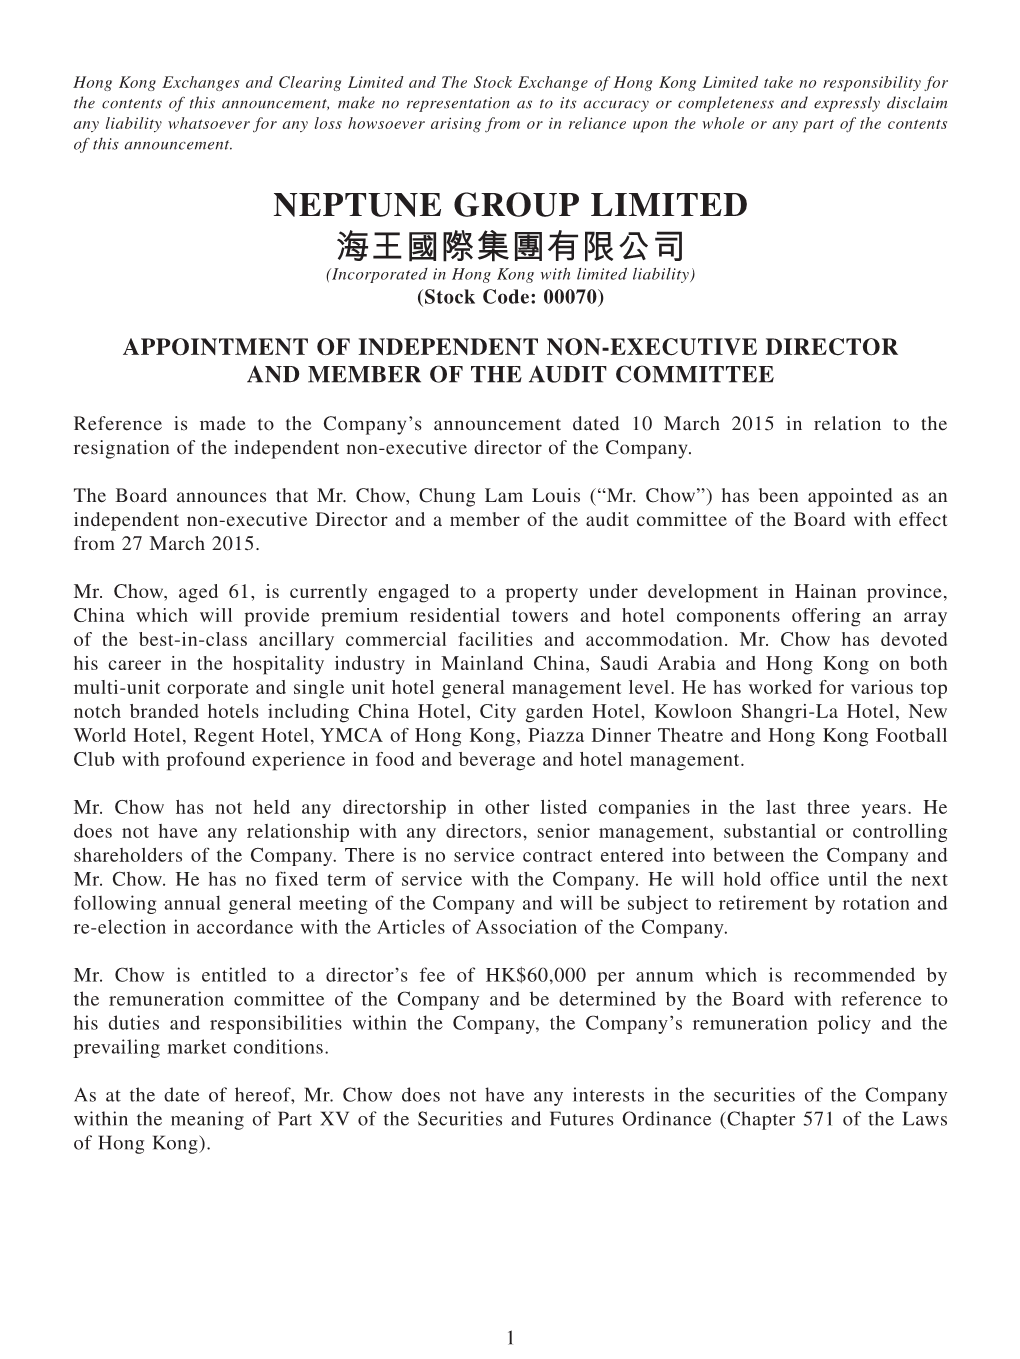 NEPTUNE GROUP LIMITED 海王國際集團有限公司 (Incorporated in Hong Kong with Limited Liability) (Stock Code: 00070)